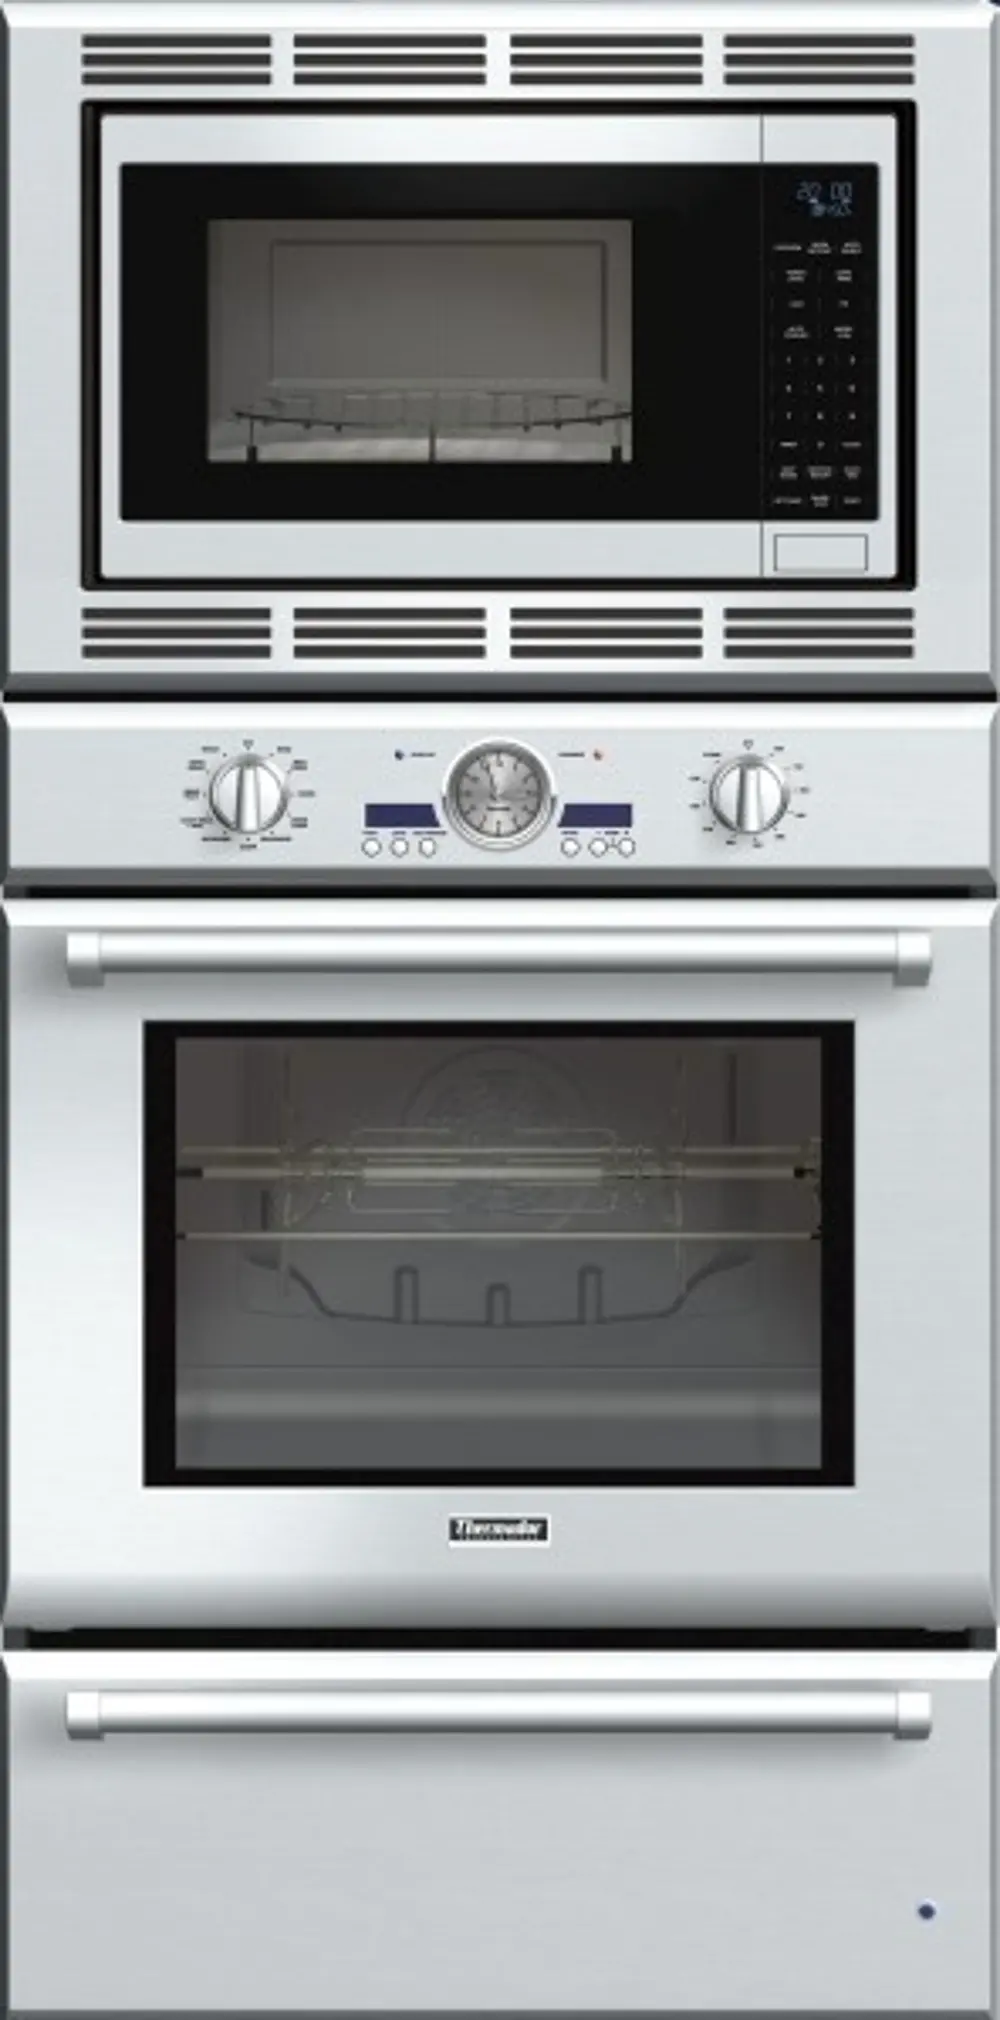 PODMW301J Thermador 30 Inch Double Wall Oven - Stainless Steel-1